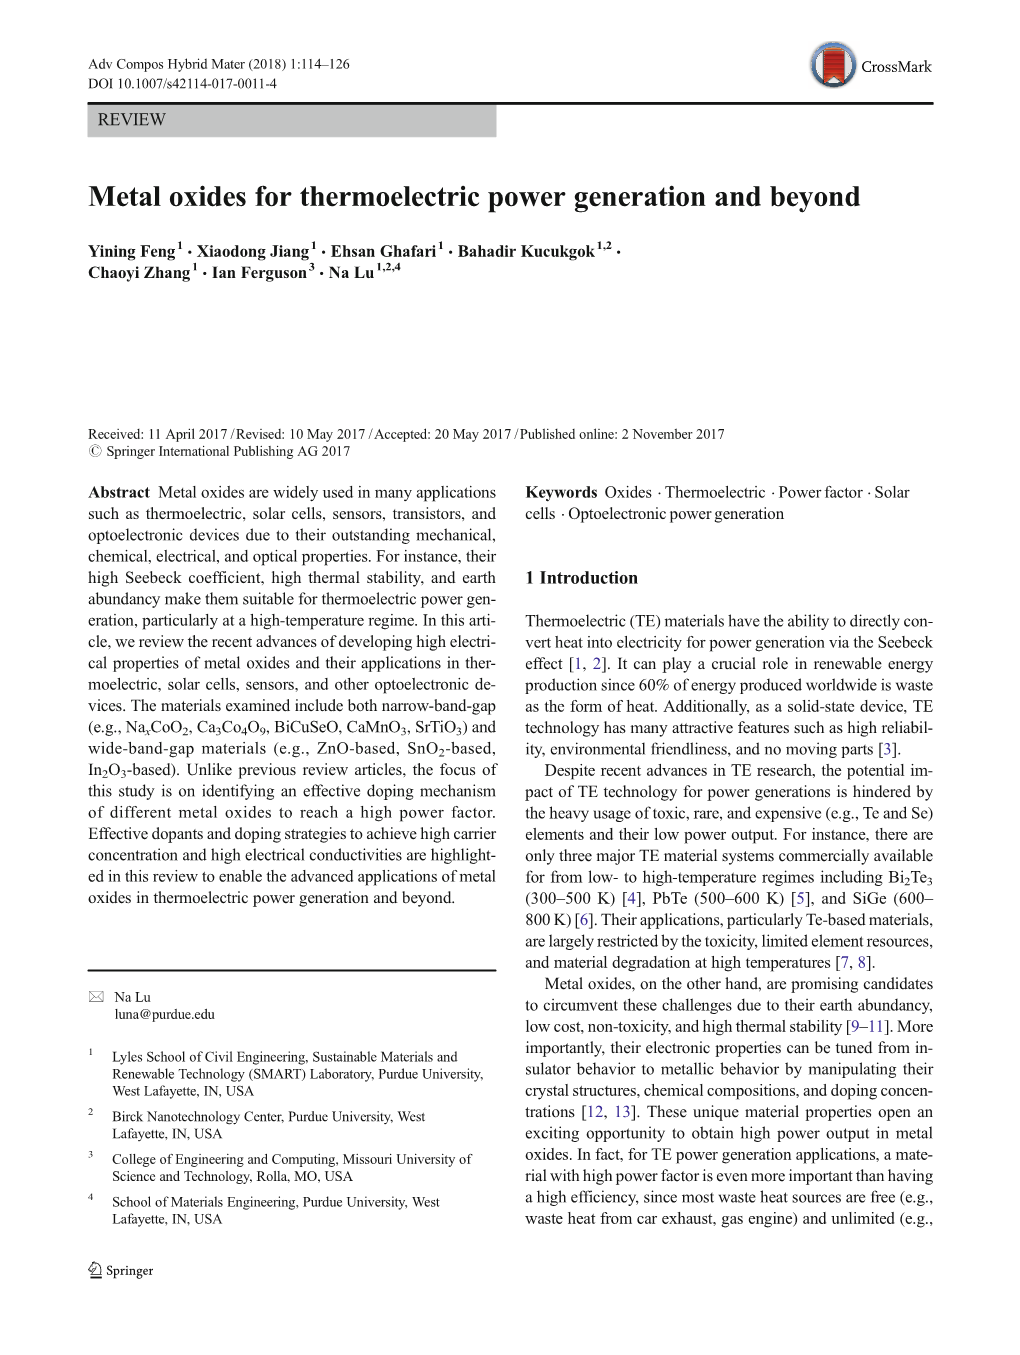 Metal Oxides for Thermoelectric Power Generation and Beyond